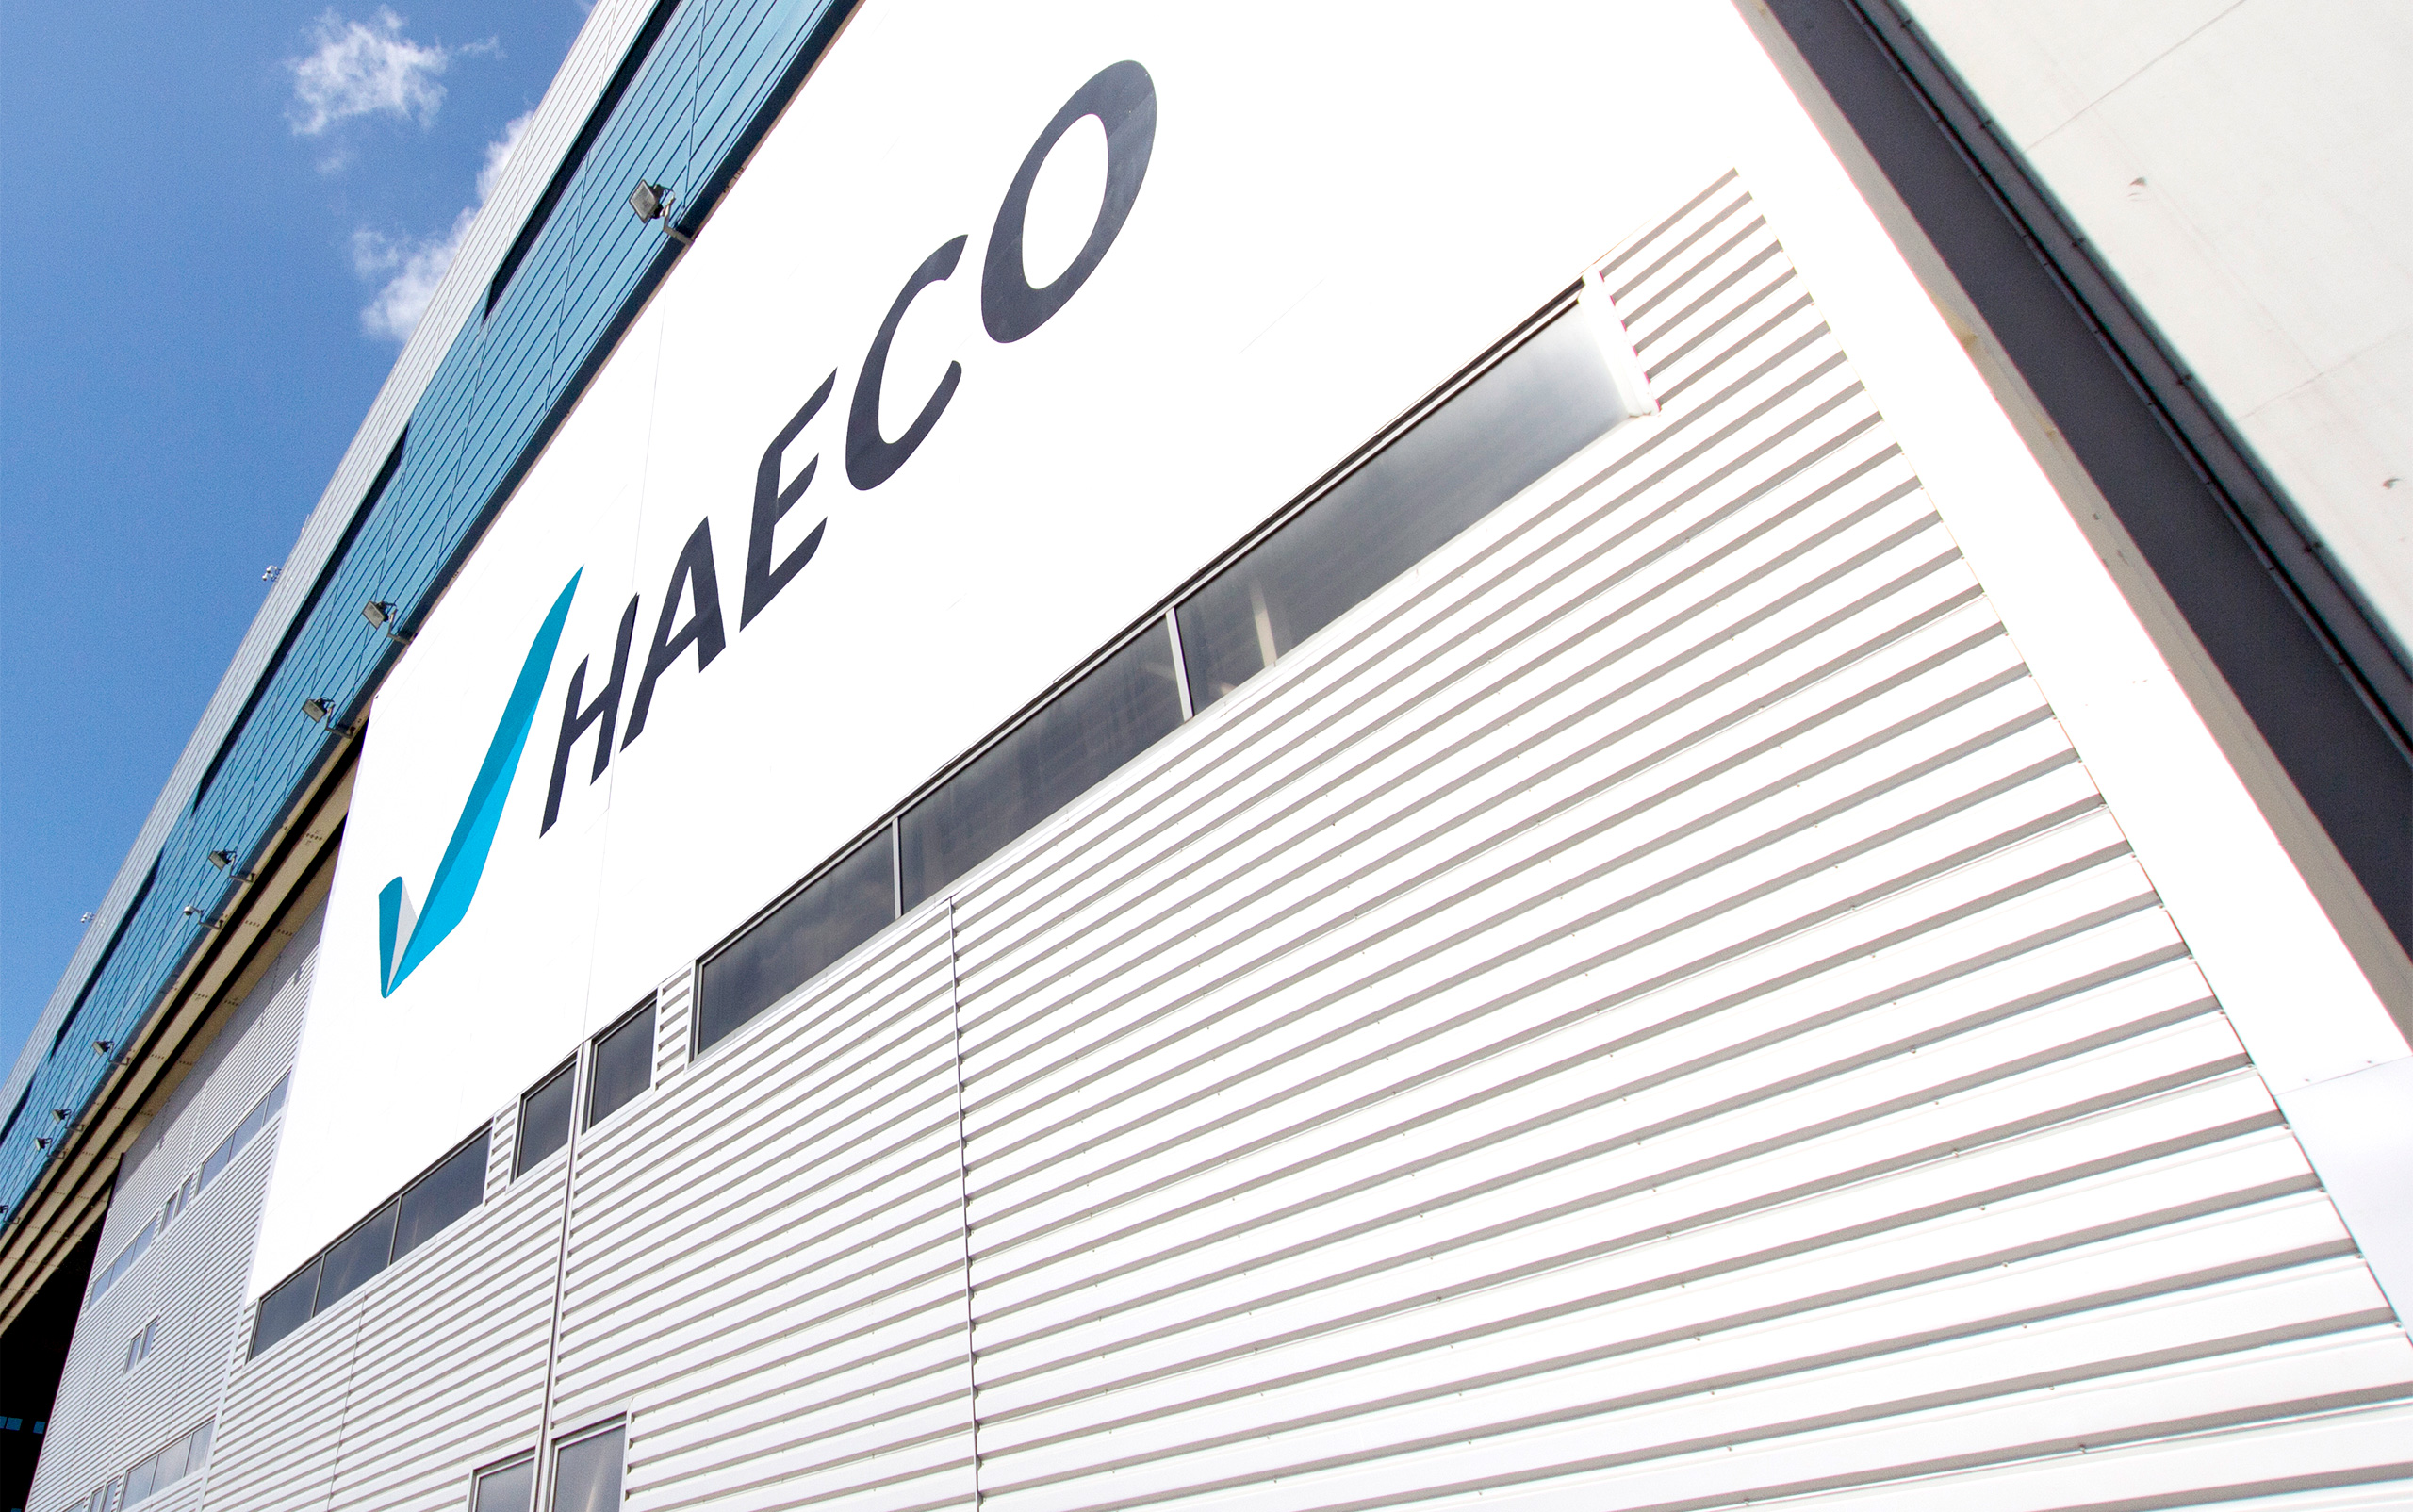 HAECO – Supplier compliance monitoring